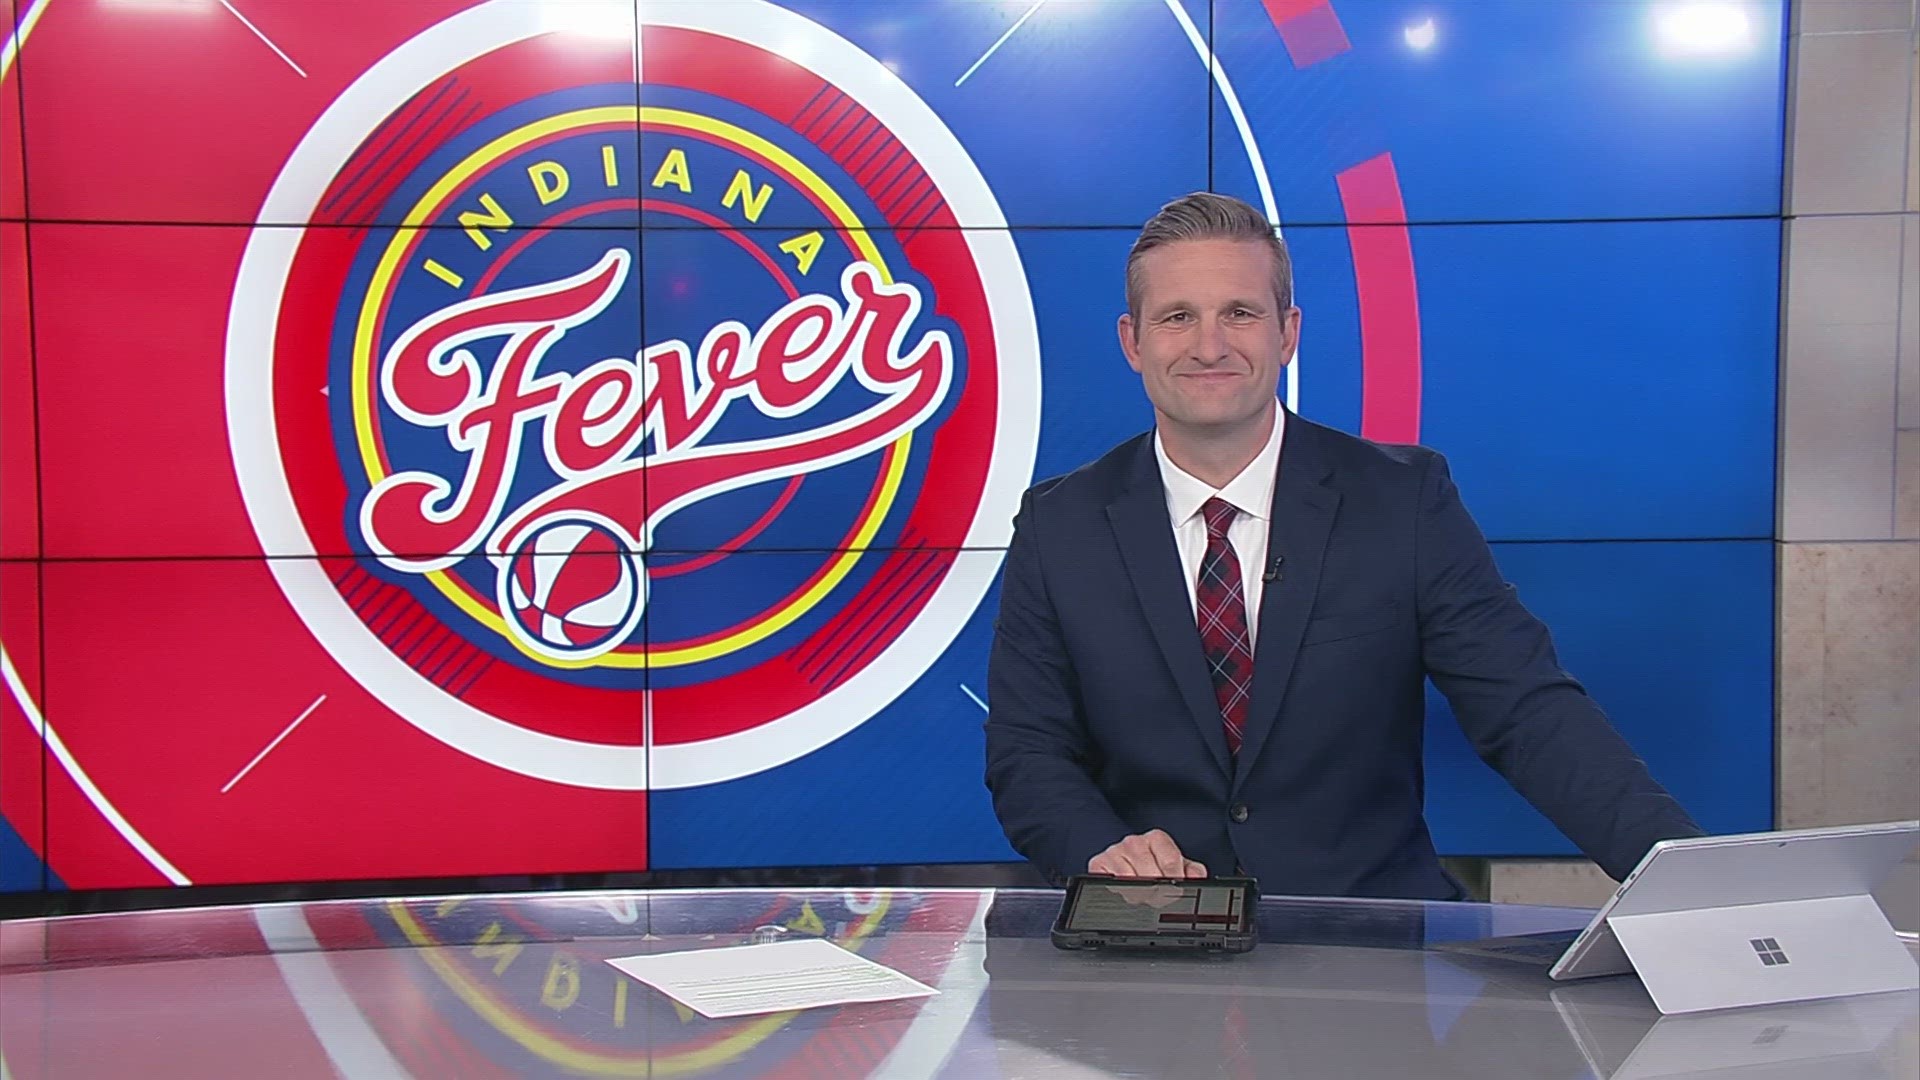 The broadcast schedule will include 17 Fever games, including the home opener on May 16.